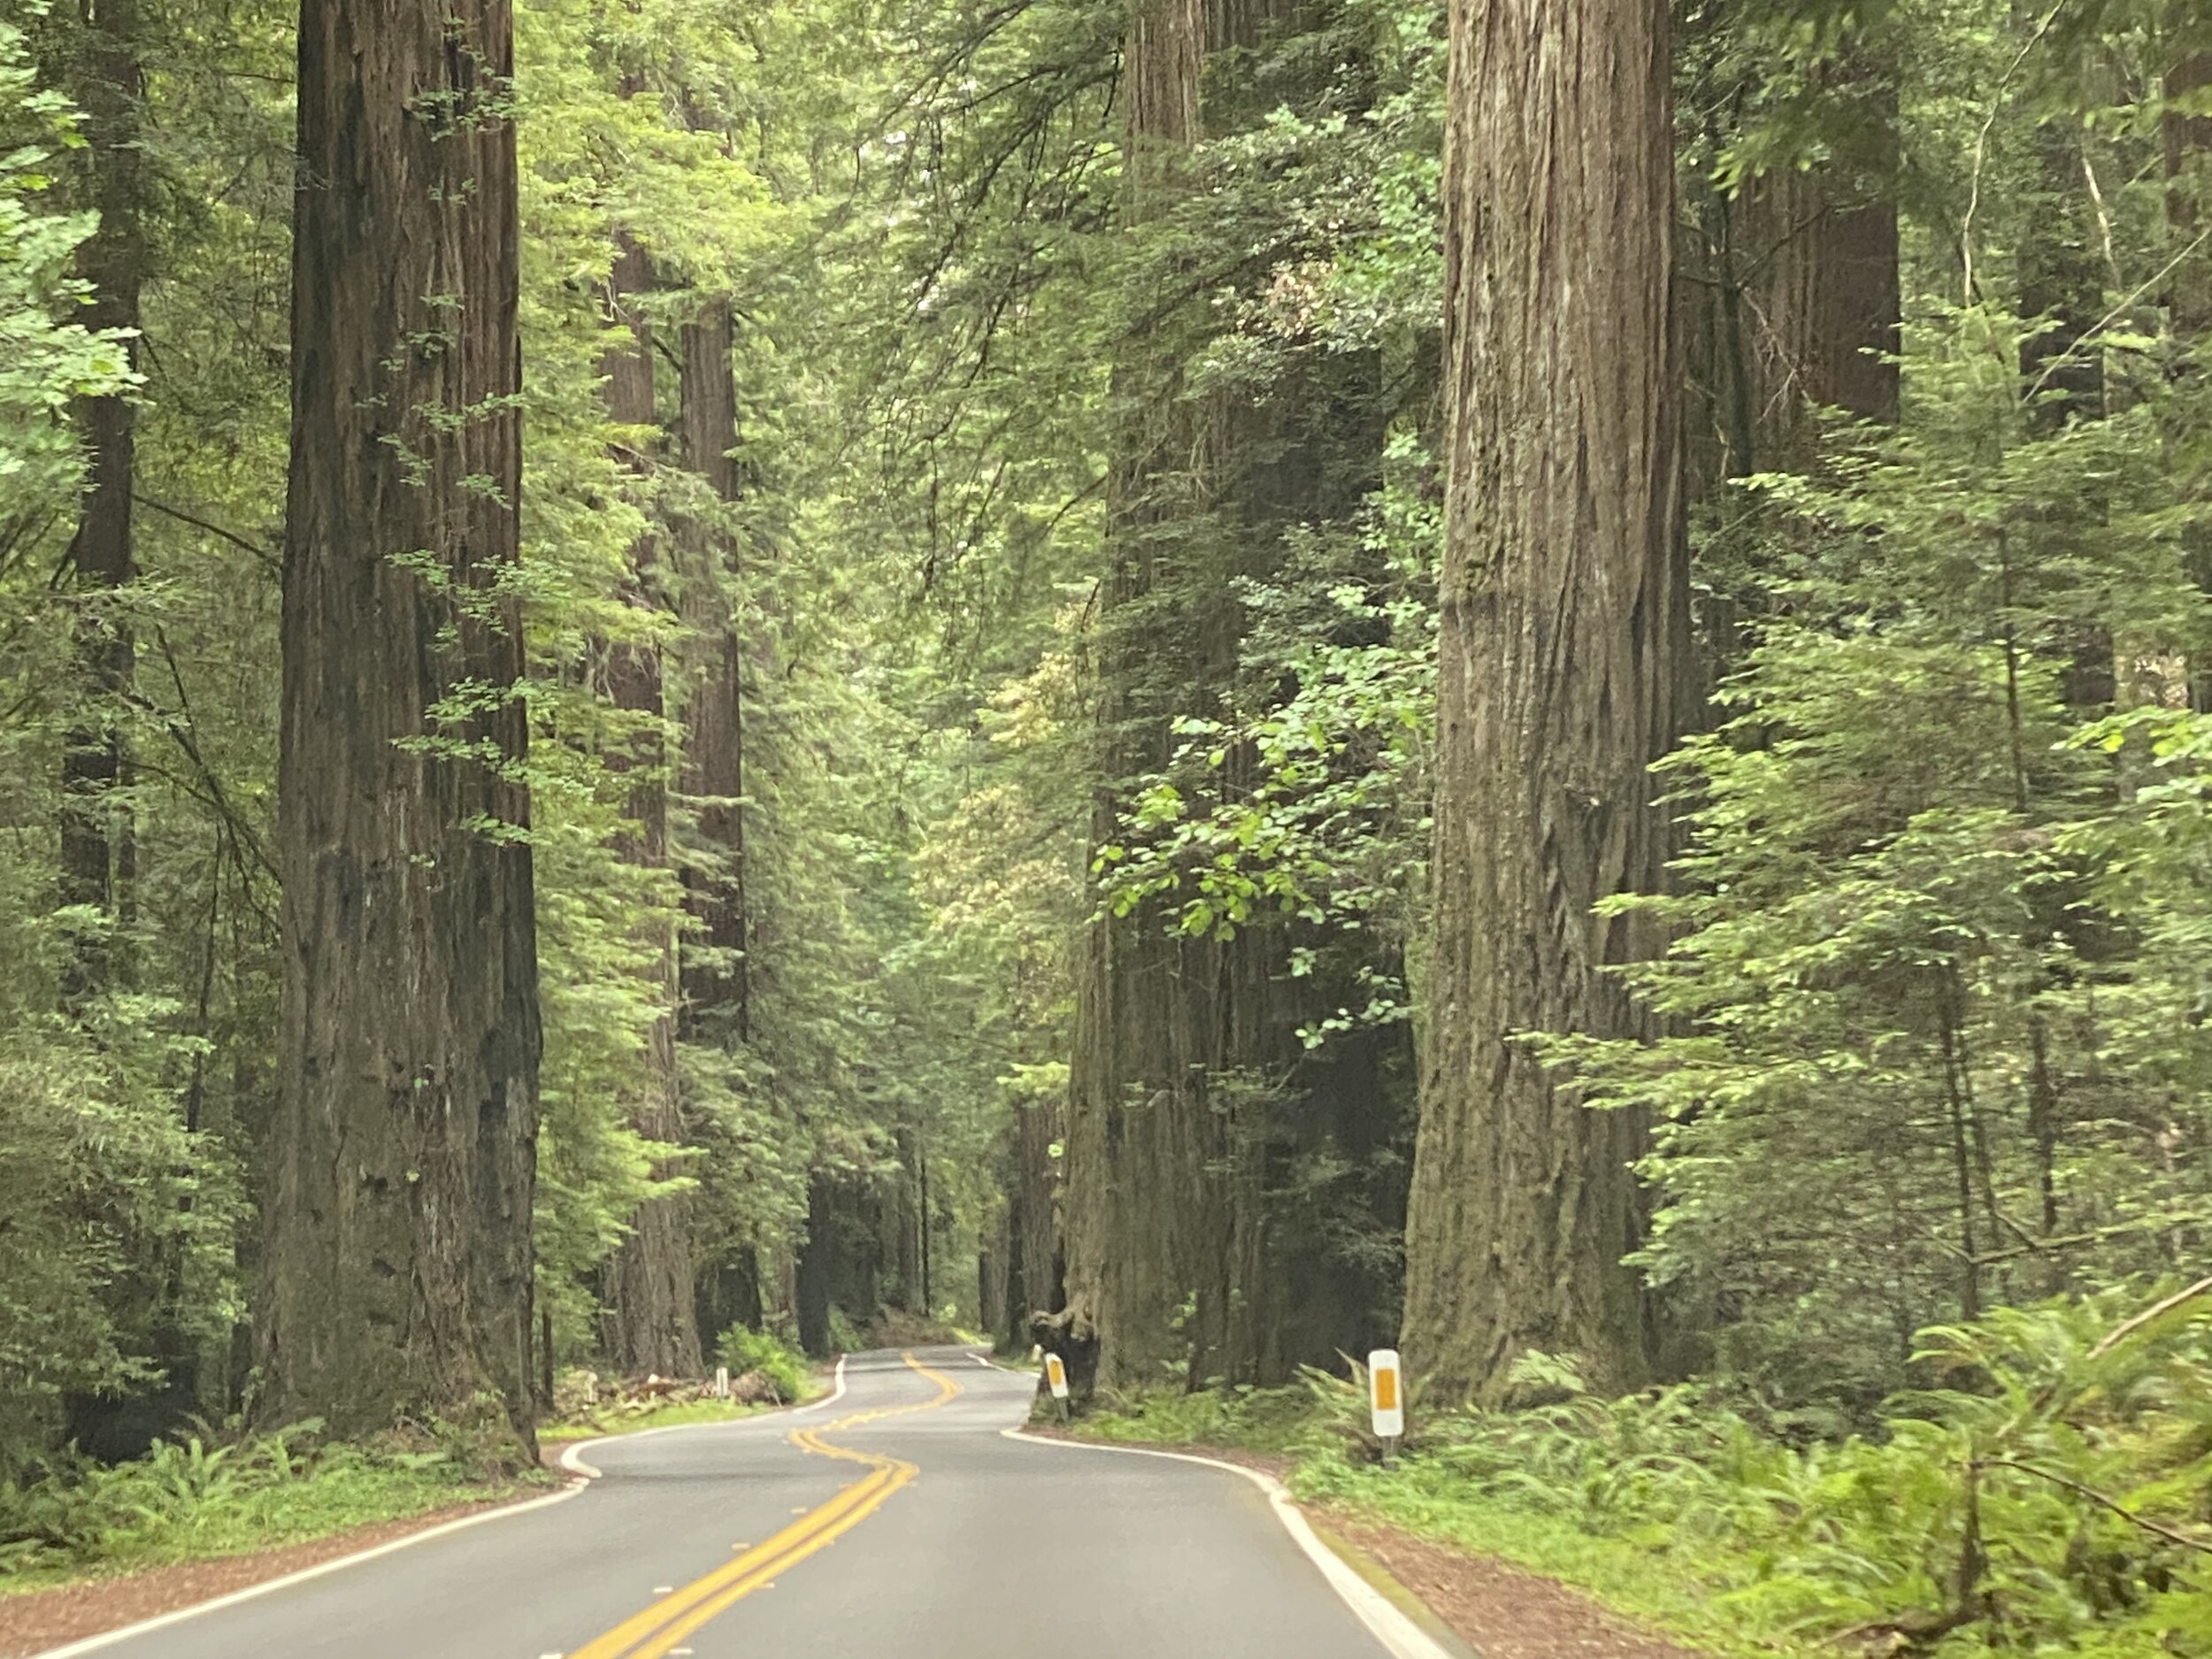 Beautiful drive through the redwoods of the Hall of Giants.  Photo by Karen Boudreaux, June 11, 2021